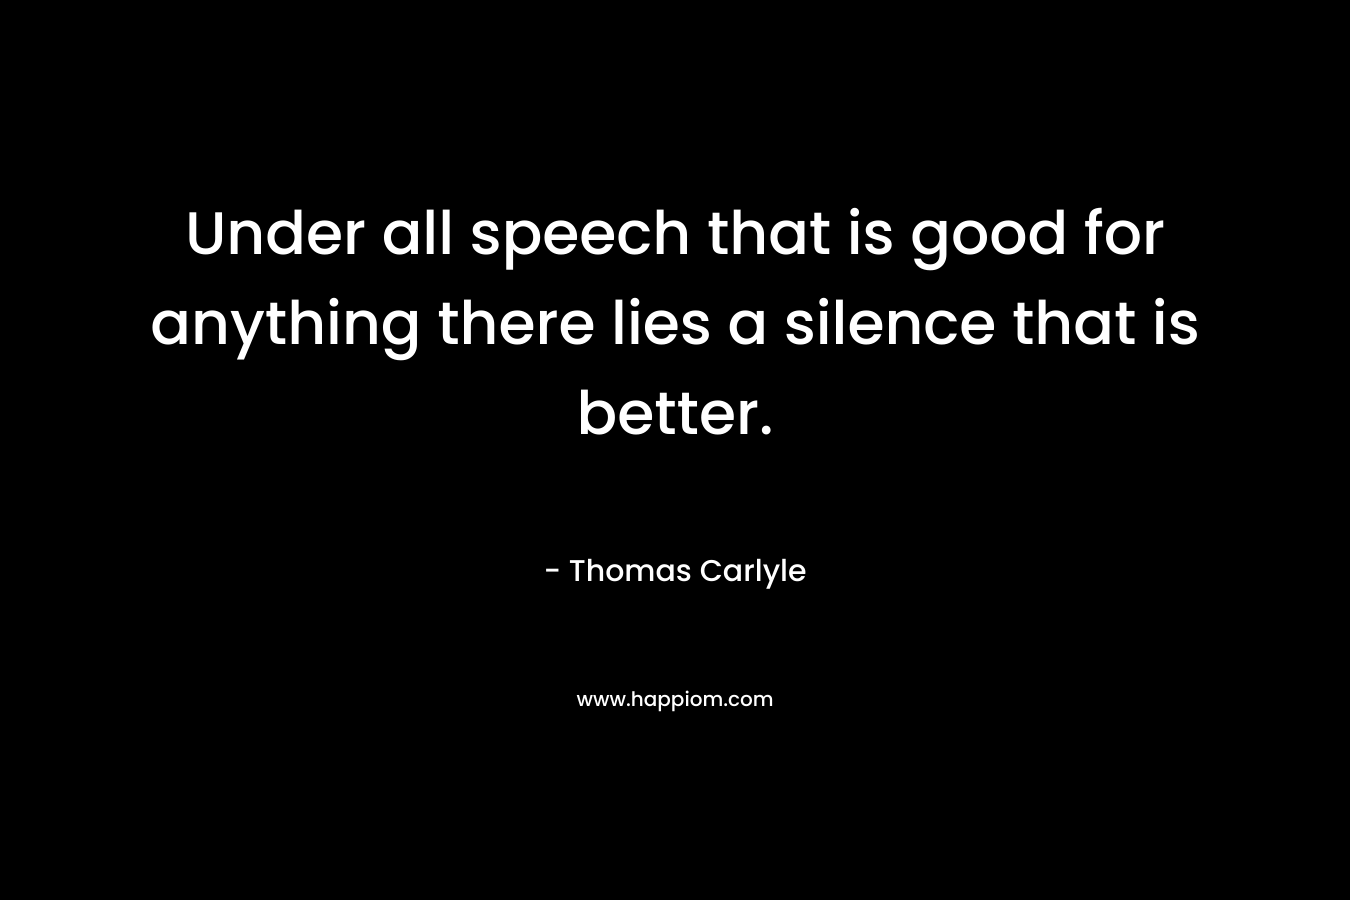 Under all speech that is good for anything there lies a silence that is better. – Thomas Carlyle